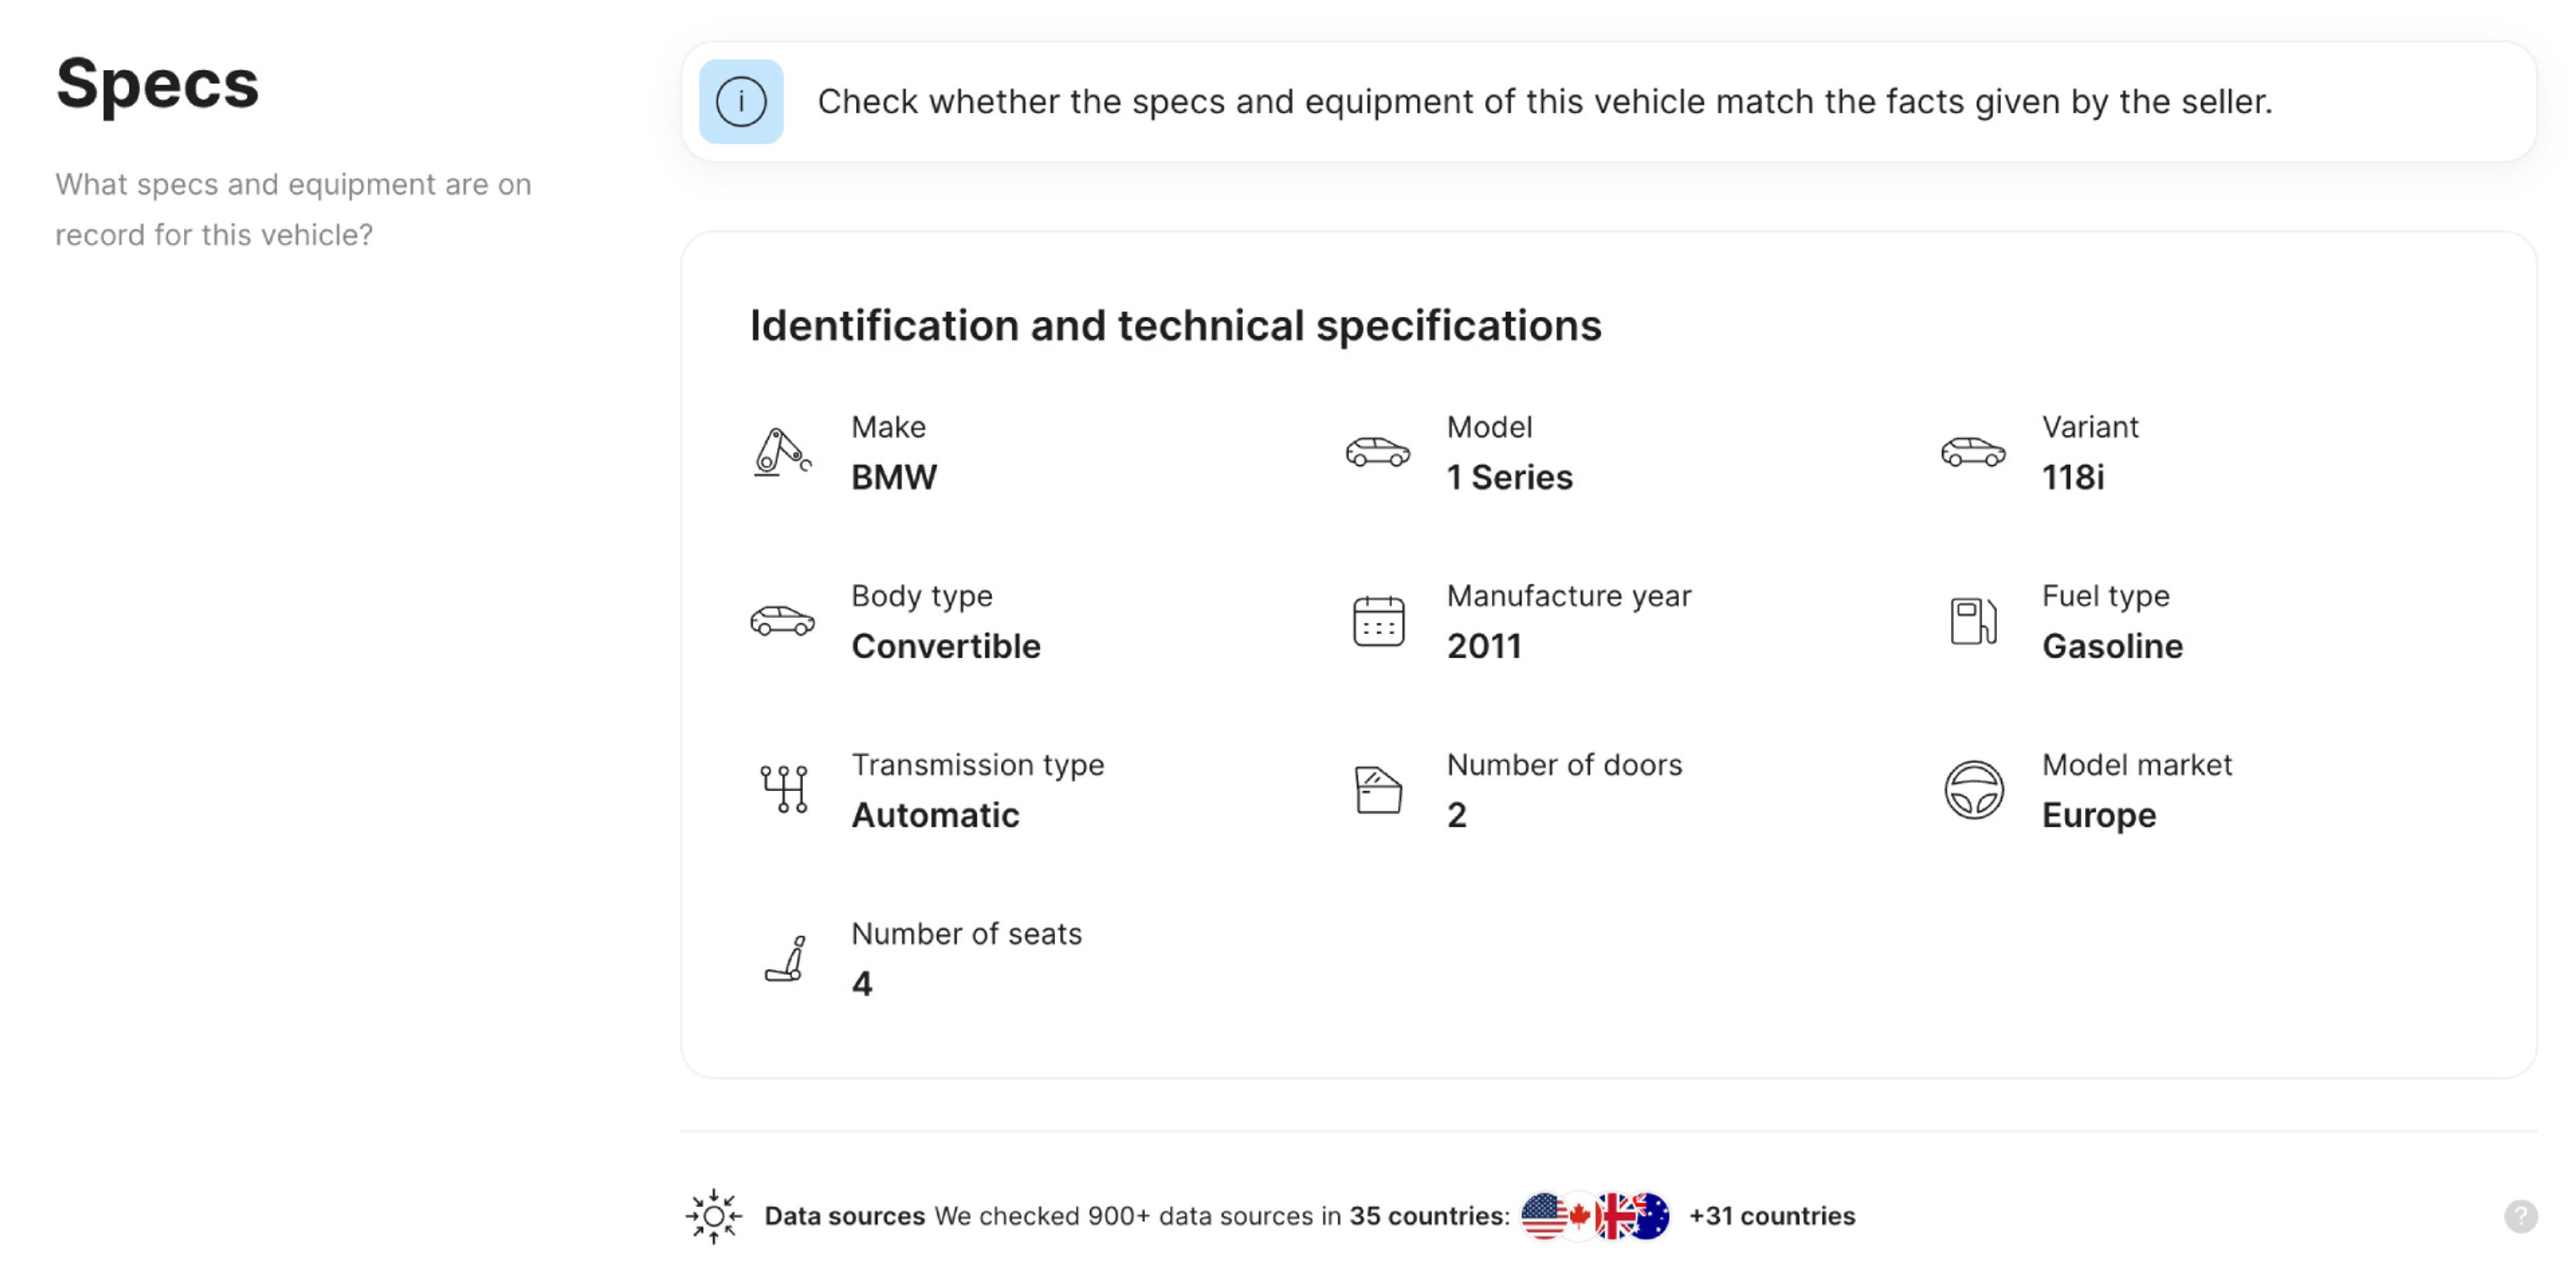 Specs section in carVertical's vehicle history report